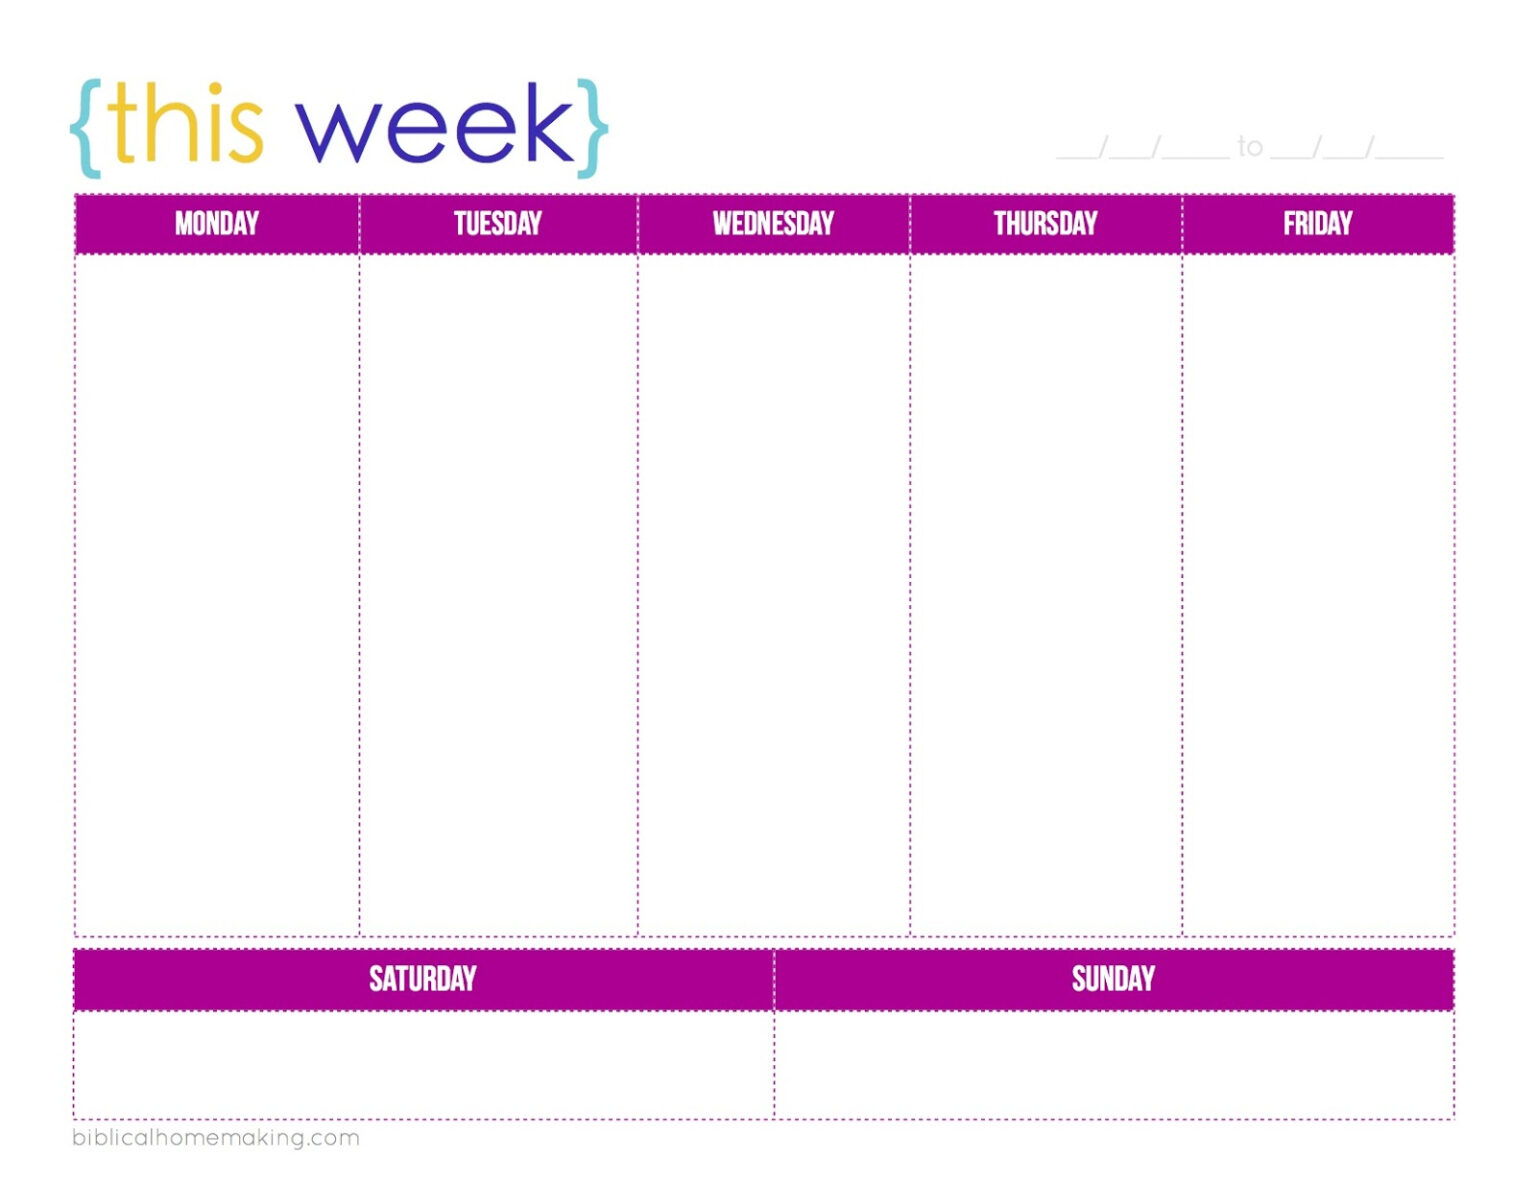 How To Print A Weekly Calendar